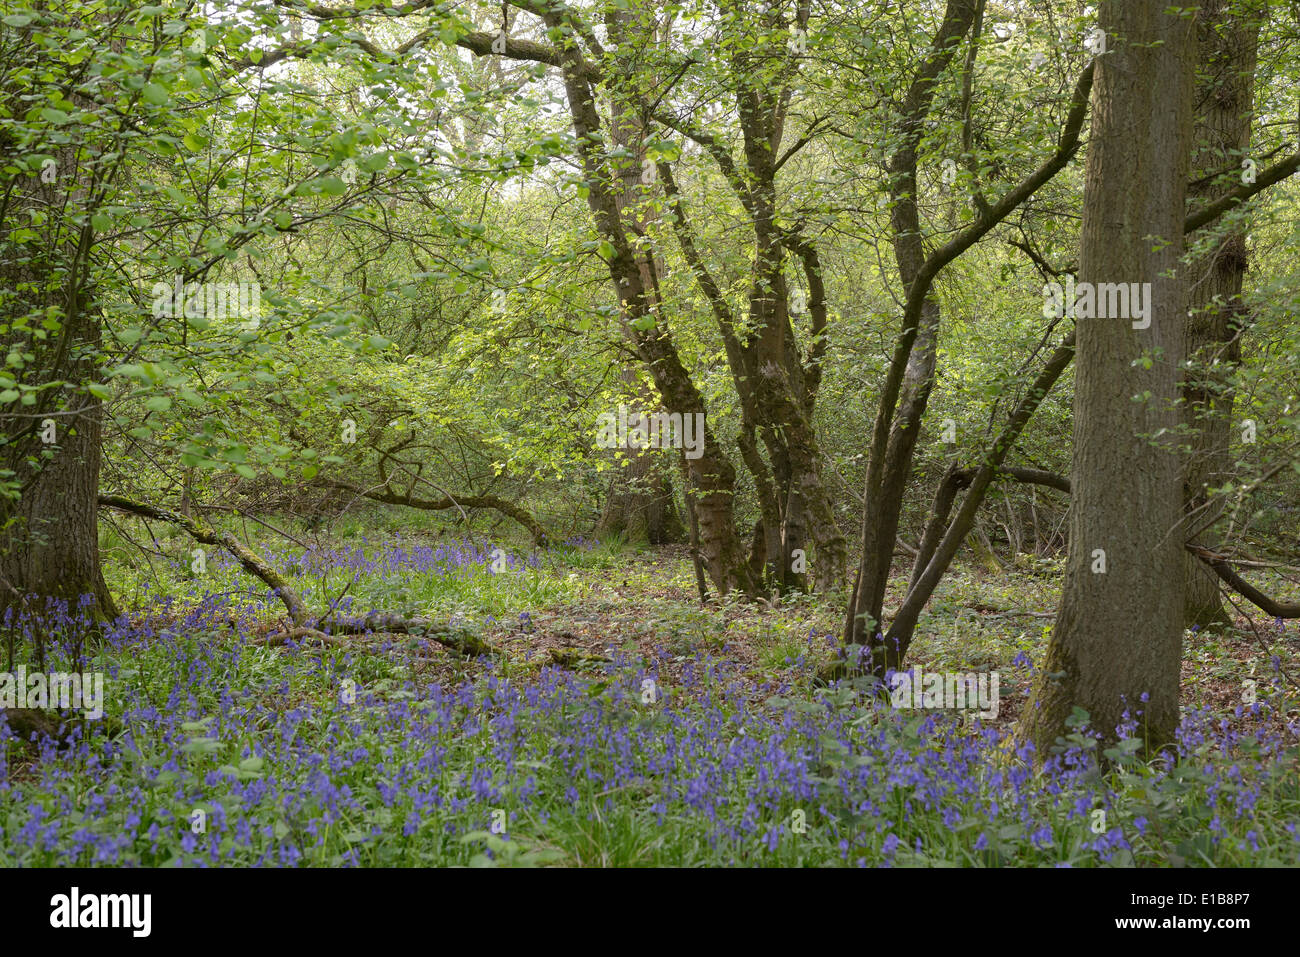 Sheephouse Wood near Steeple Claydon  on the line of the proposed HS2 rail route.  April 24th 2014 Stock Photo